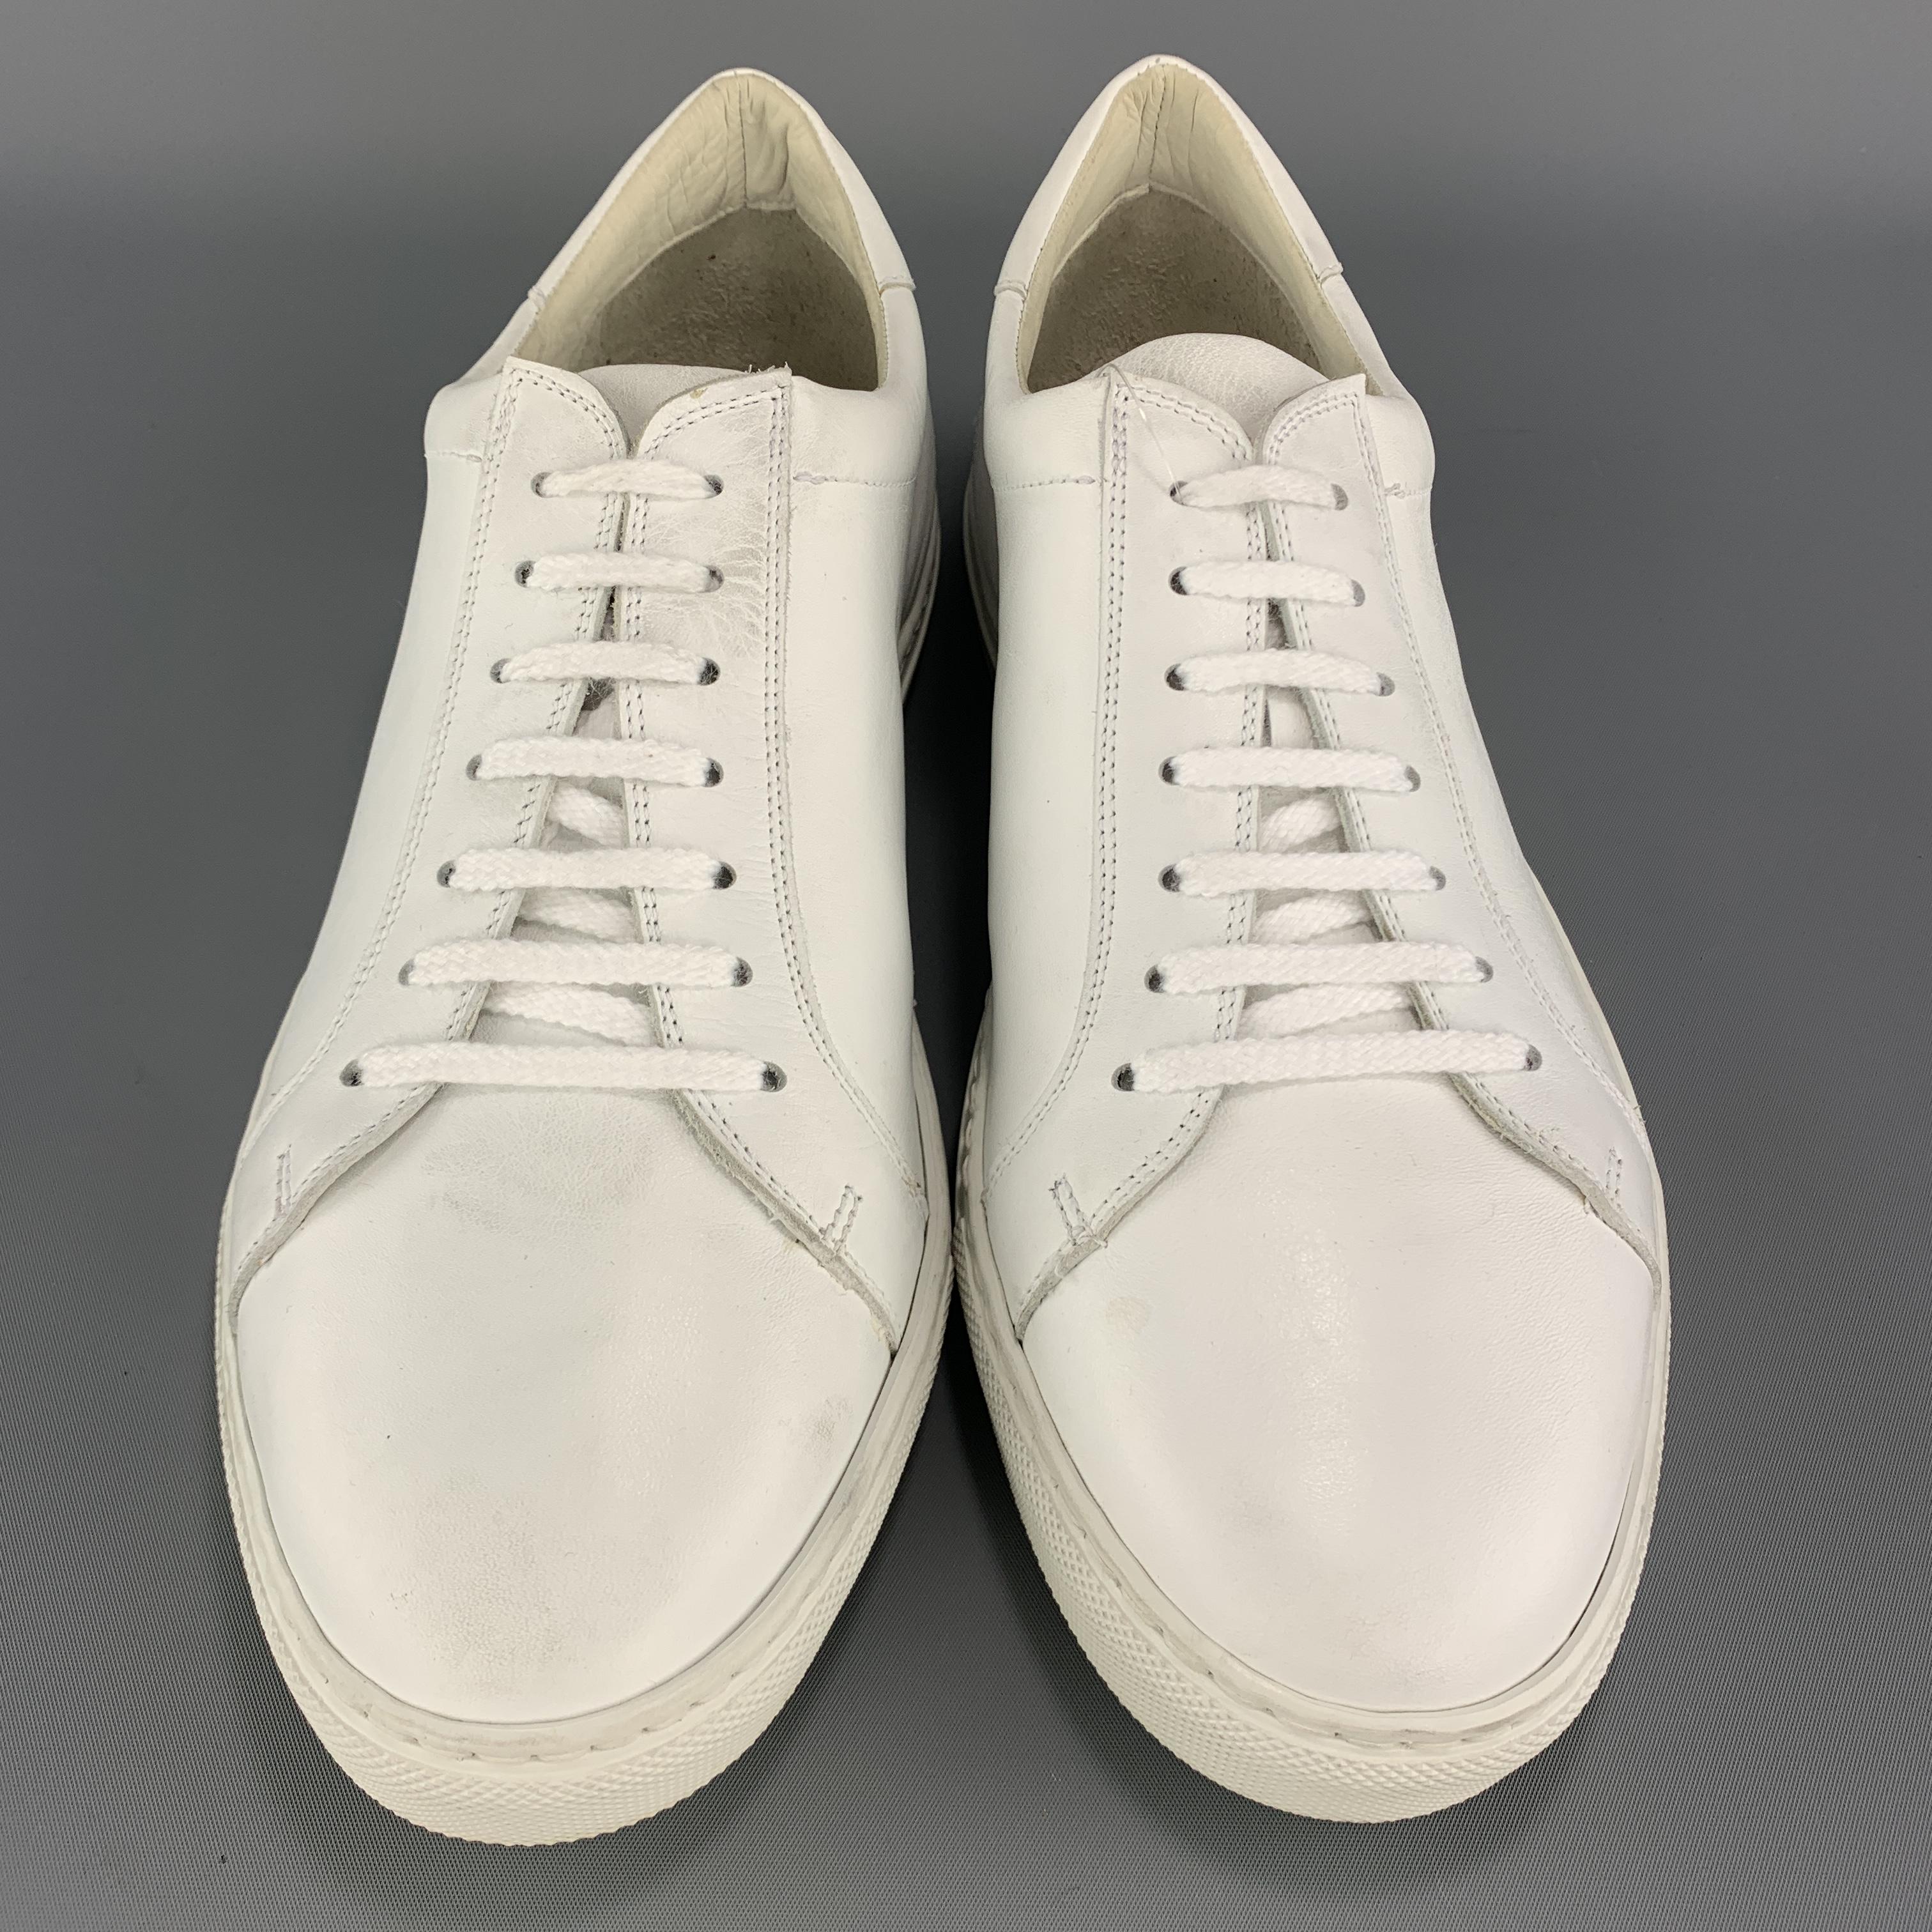 AGNES B. low top sneakers come in matte white leather with a lace up front and white rubber sole. 

Excellent Pre-Owned Condition.
Marked: IT 43

Outsole: 11.75 x 4 in.